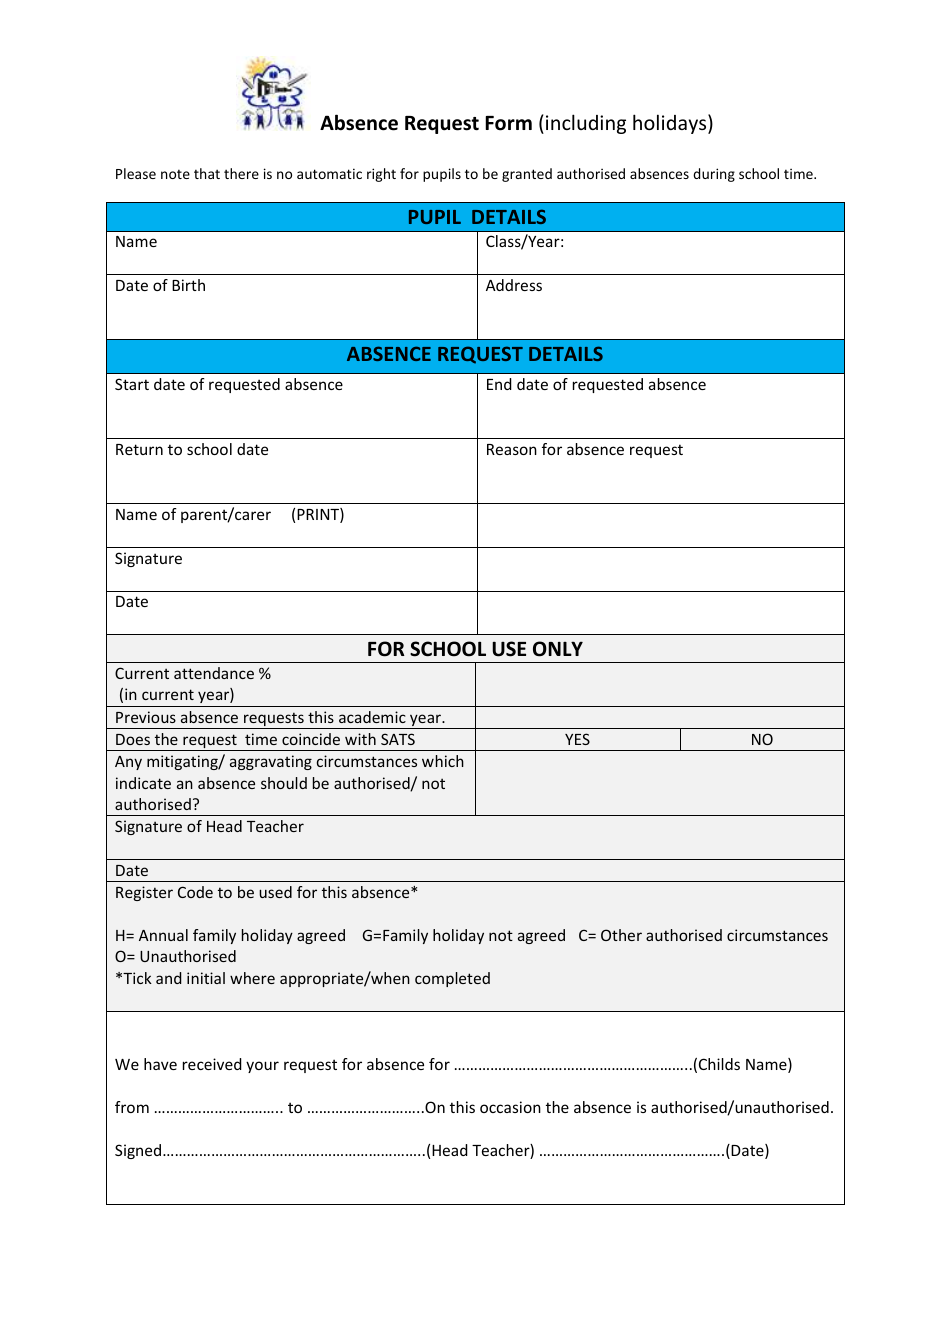 Absence Request Form (Including Holidays), Page 1